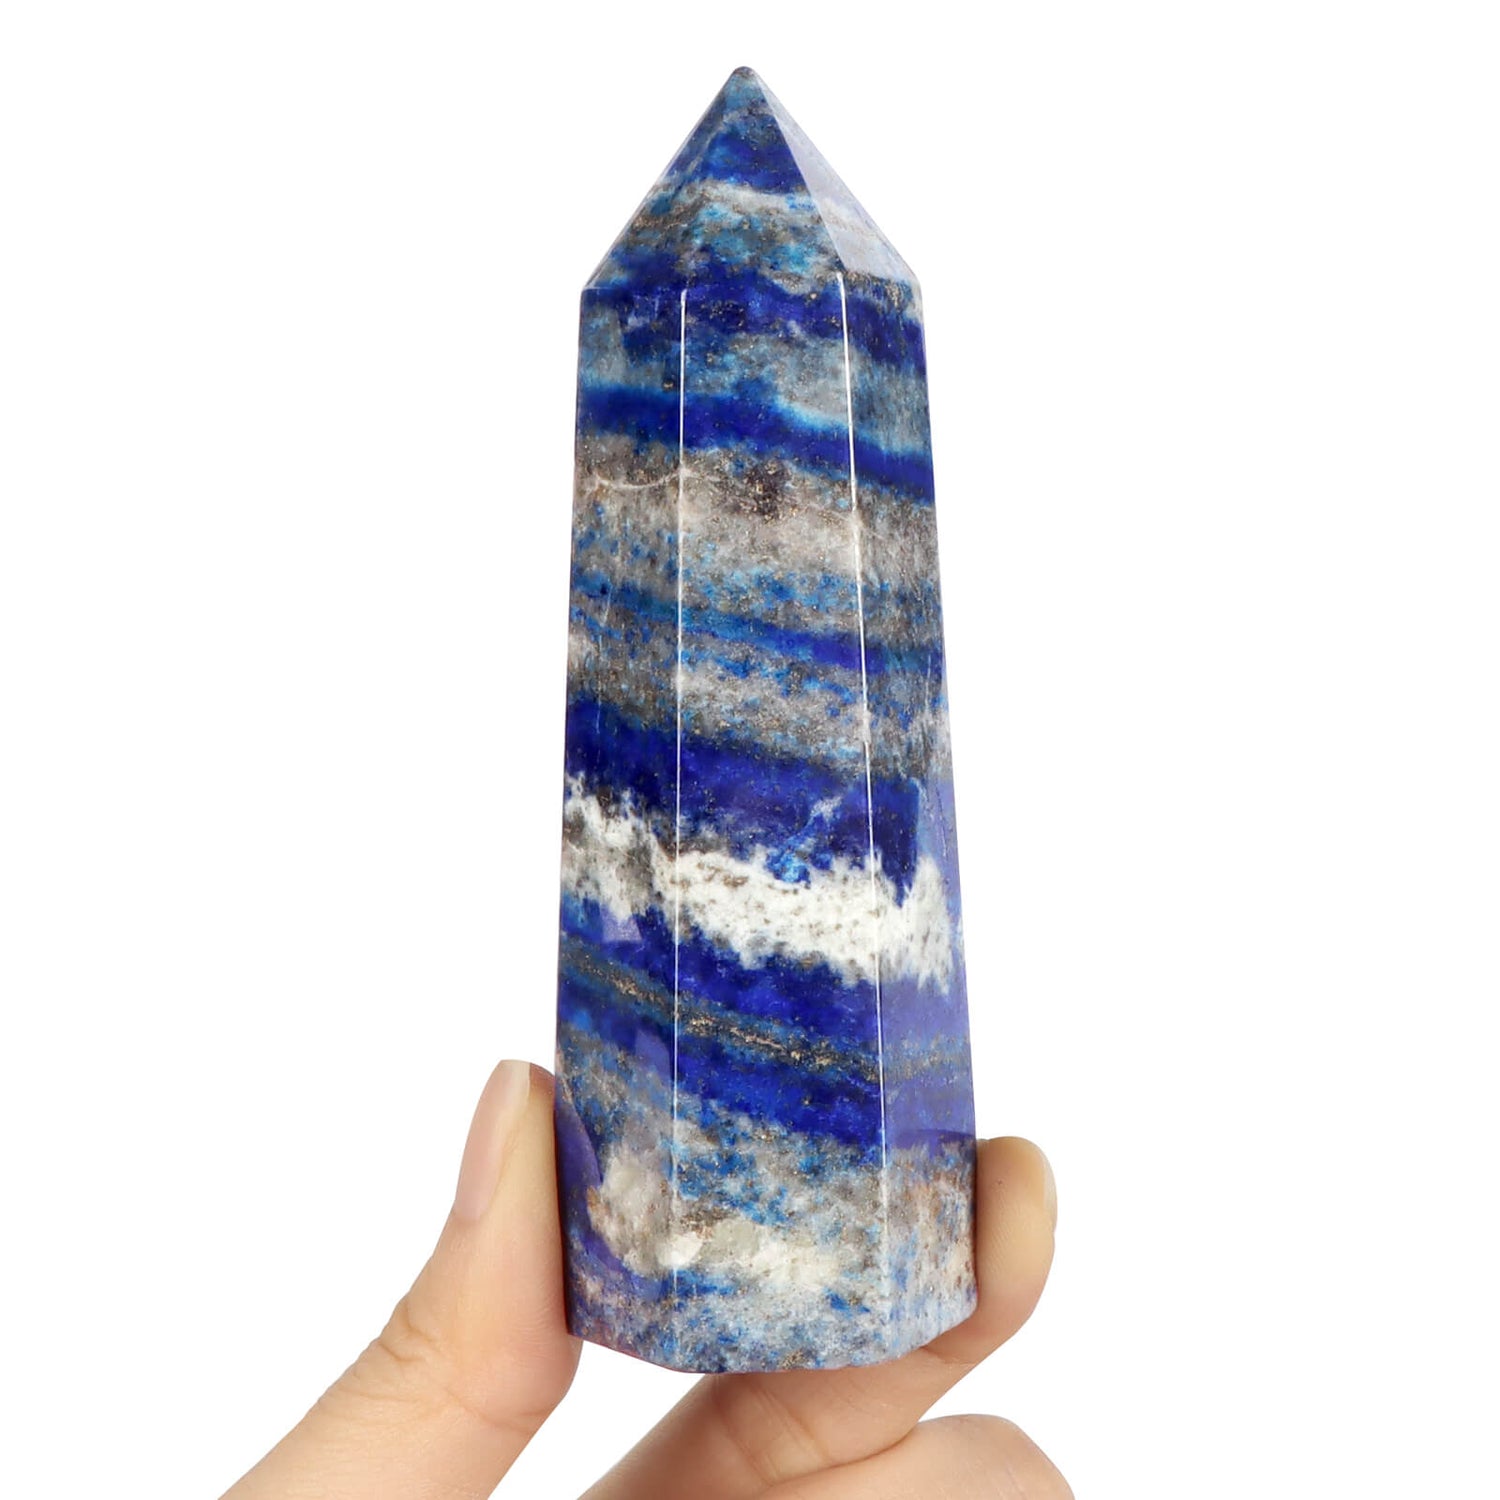 Crystal Points